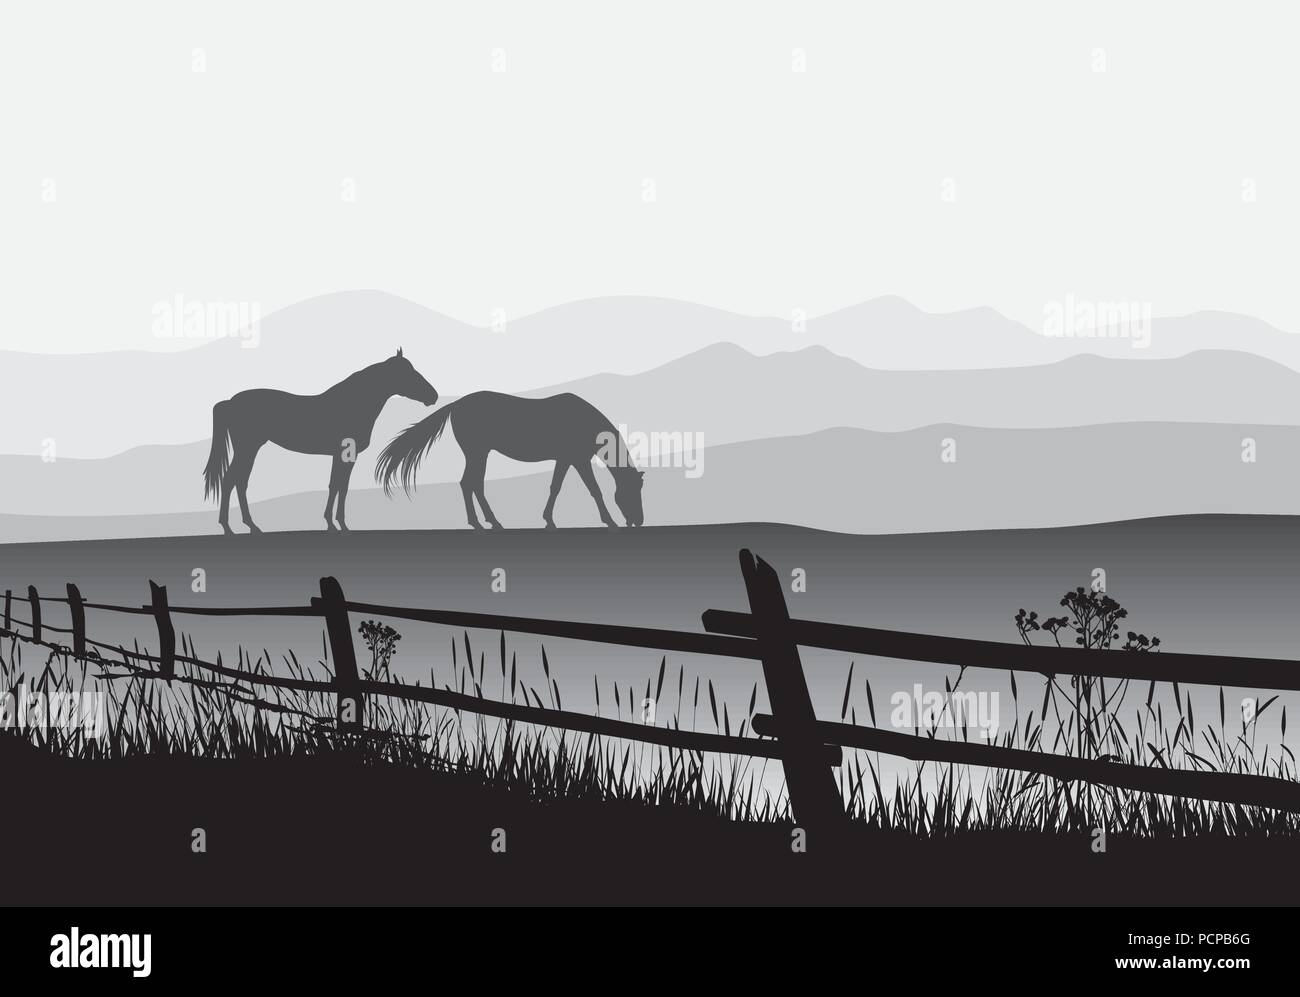 Two horses on meadow with fence Stock Vector